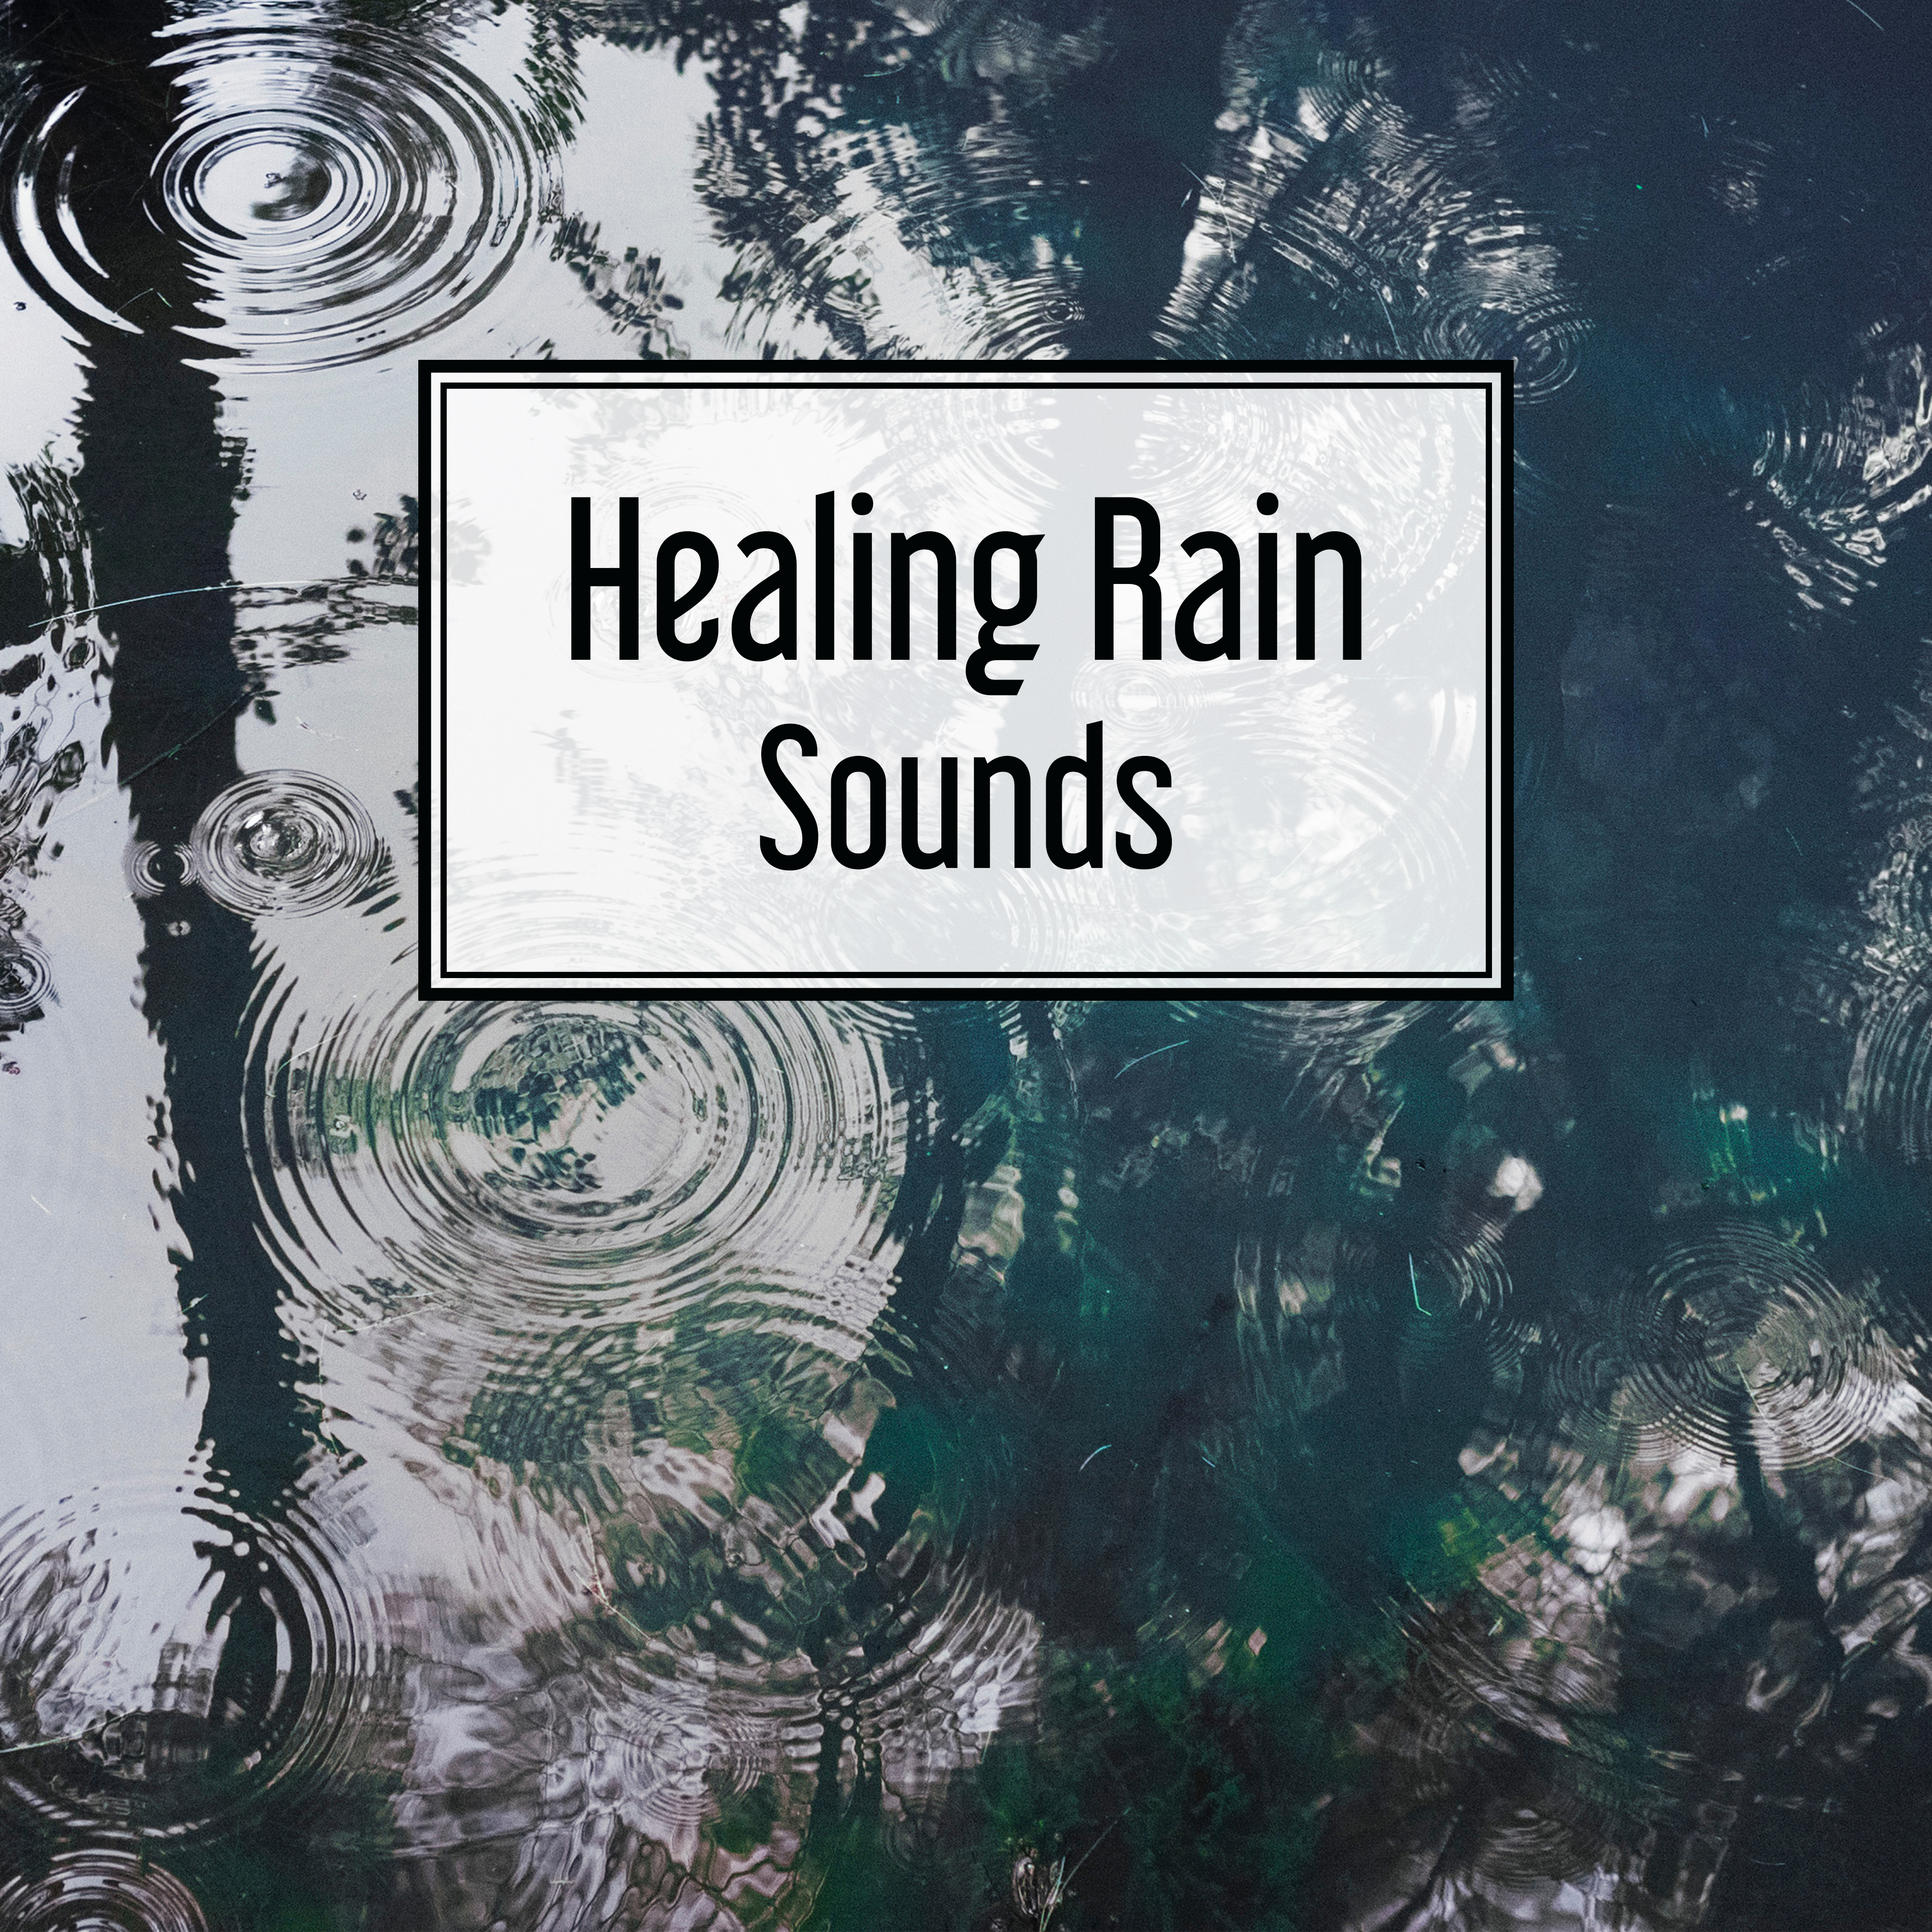 Healing Rain Sounds  Soothing Sounds, New Age Relaxation, Healing Therapy, Music to Mind Calmness, Mind Control